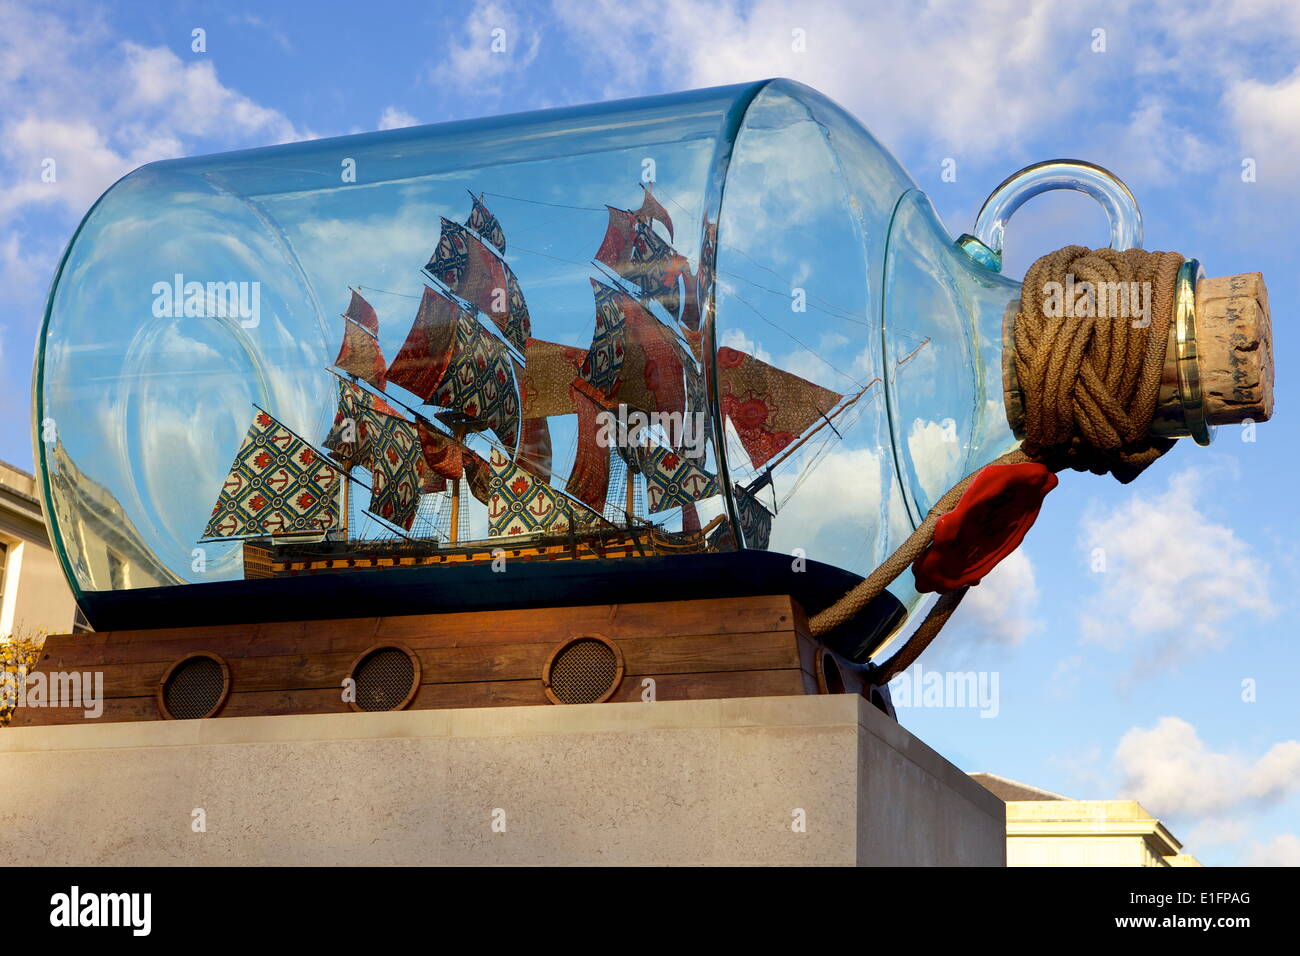 Ship in a bottle at the Maritime Museum, Greenwich, London, England, United Kingdom, Europe Stock Photo